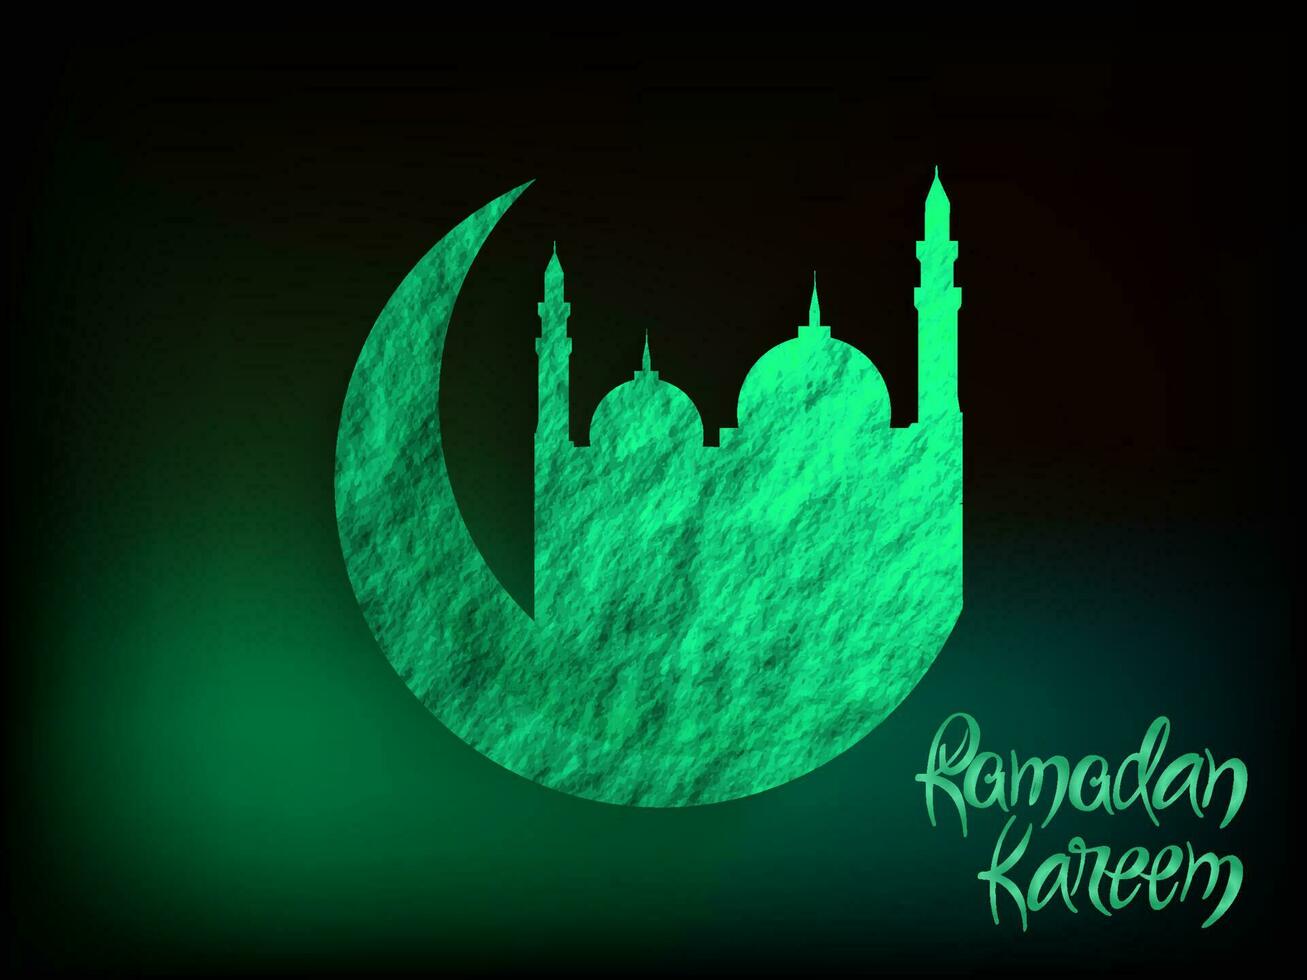 Ramadan Kareem Font With Grungy Crescent Moon, Mosque On Blurred Black And Green Background. vector